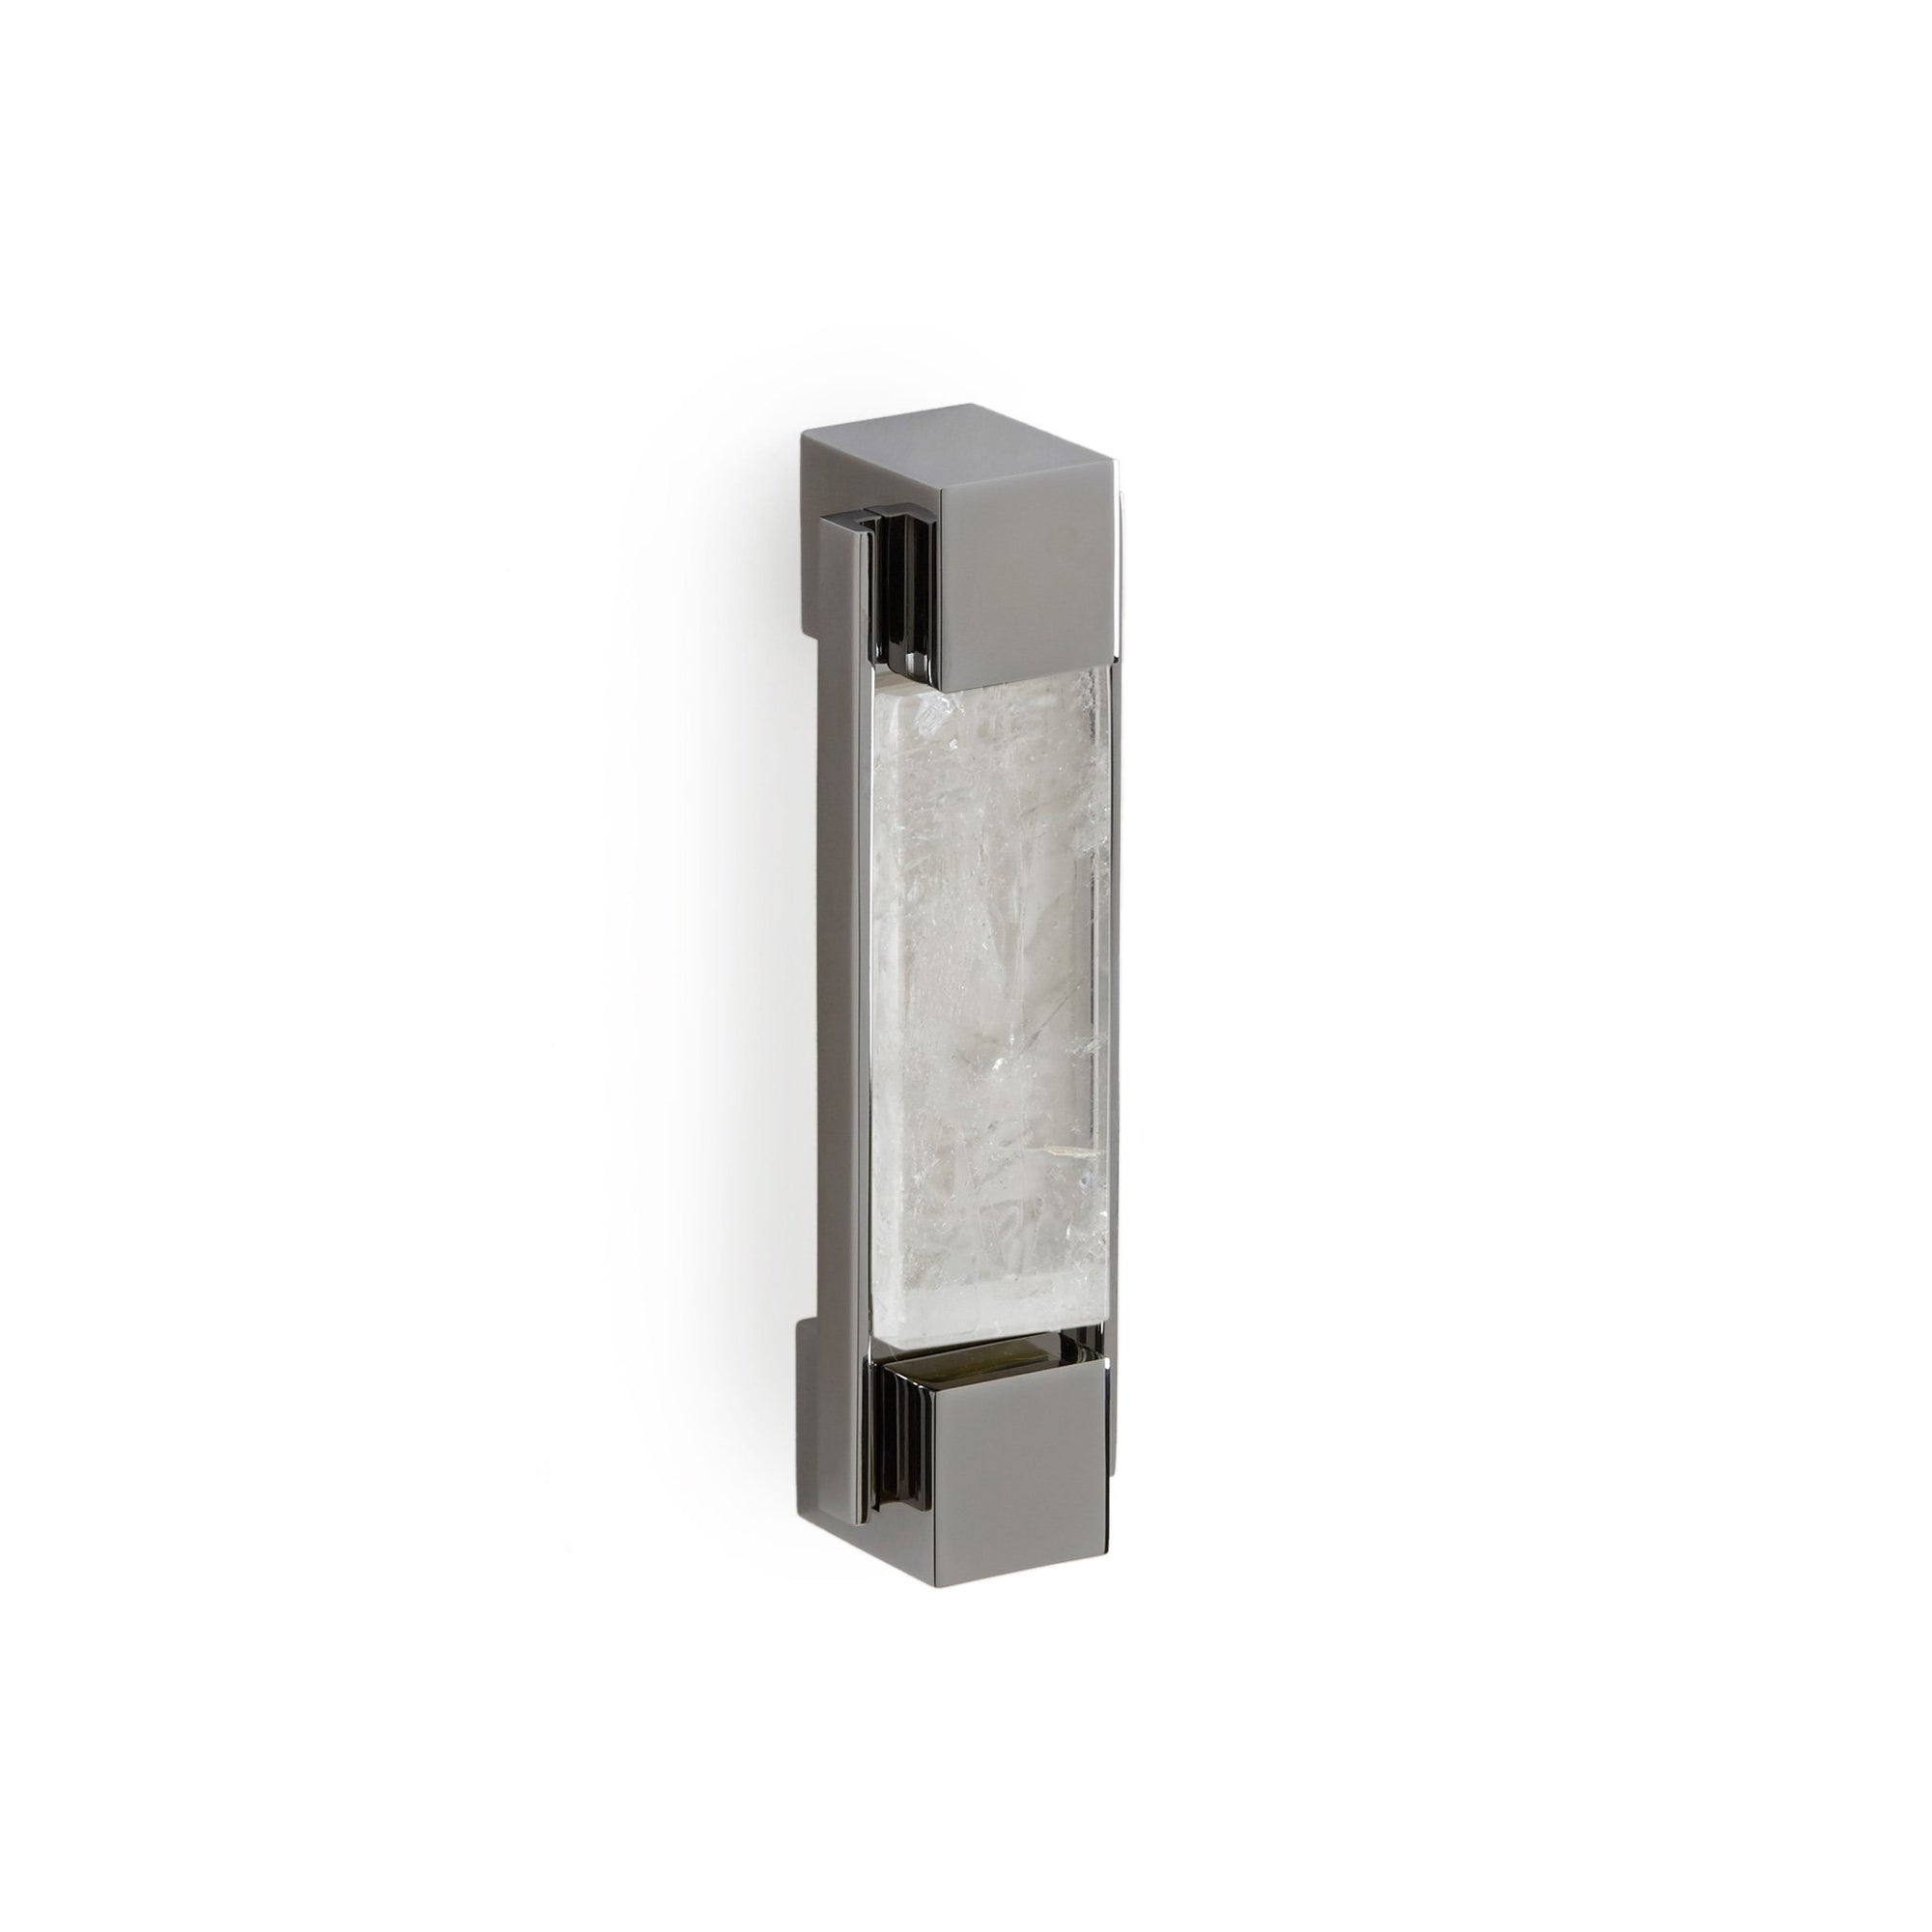 2120-BRPL-RKCR-CP Sherle Wagner International The Rock Crystal Insert Apollo Bar Pull in Polished Chrome metal finish